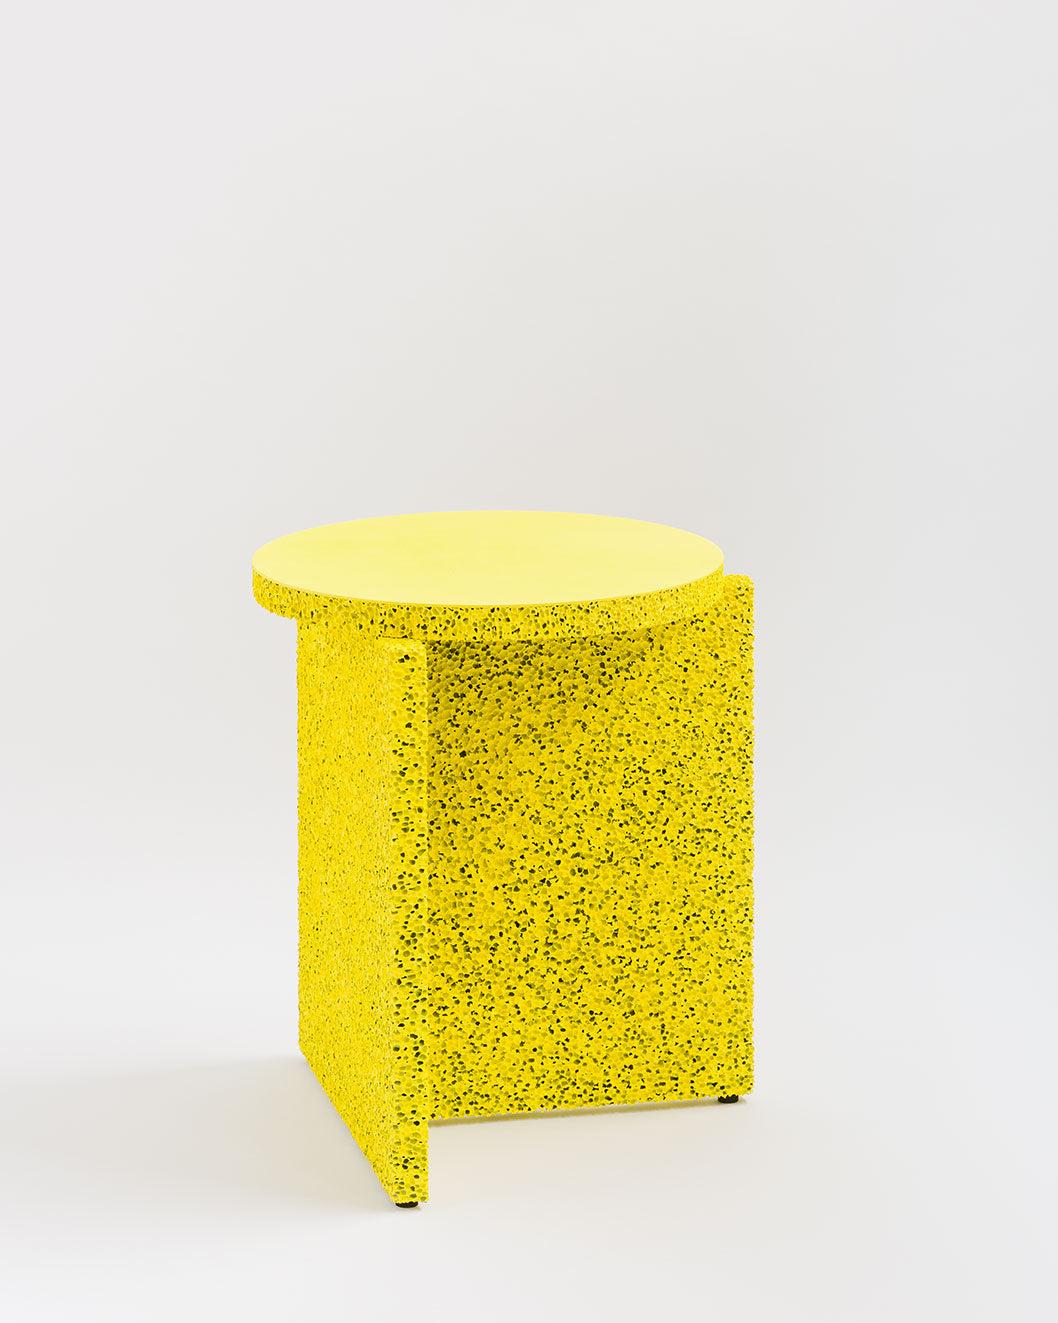 Small Synthetic Kitchen Sponge Table by Calen Knauf
Dimensions: D 40 x W 35 x H 35 cm
Materials: Painted Aluminum
Also Available: Custom colours and sizes are possible,

The Sponge Table is a sculptural side table made from carbonated aluminum